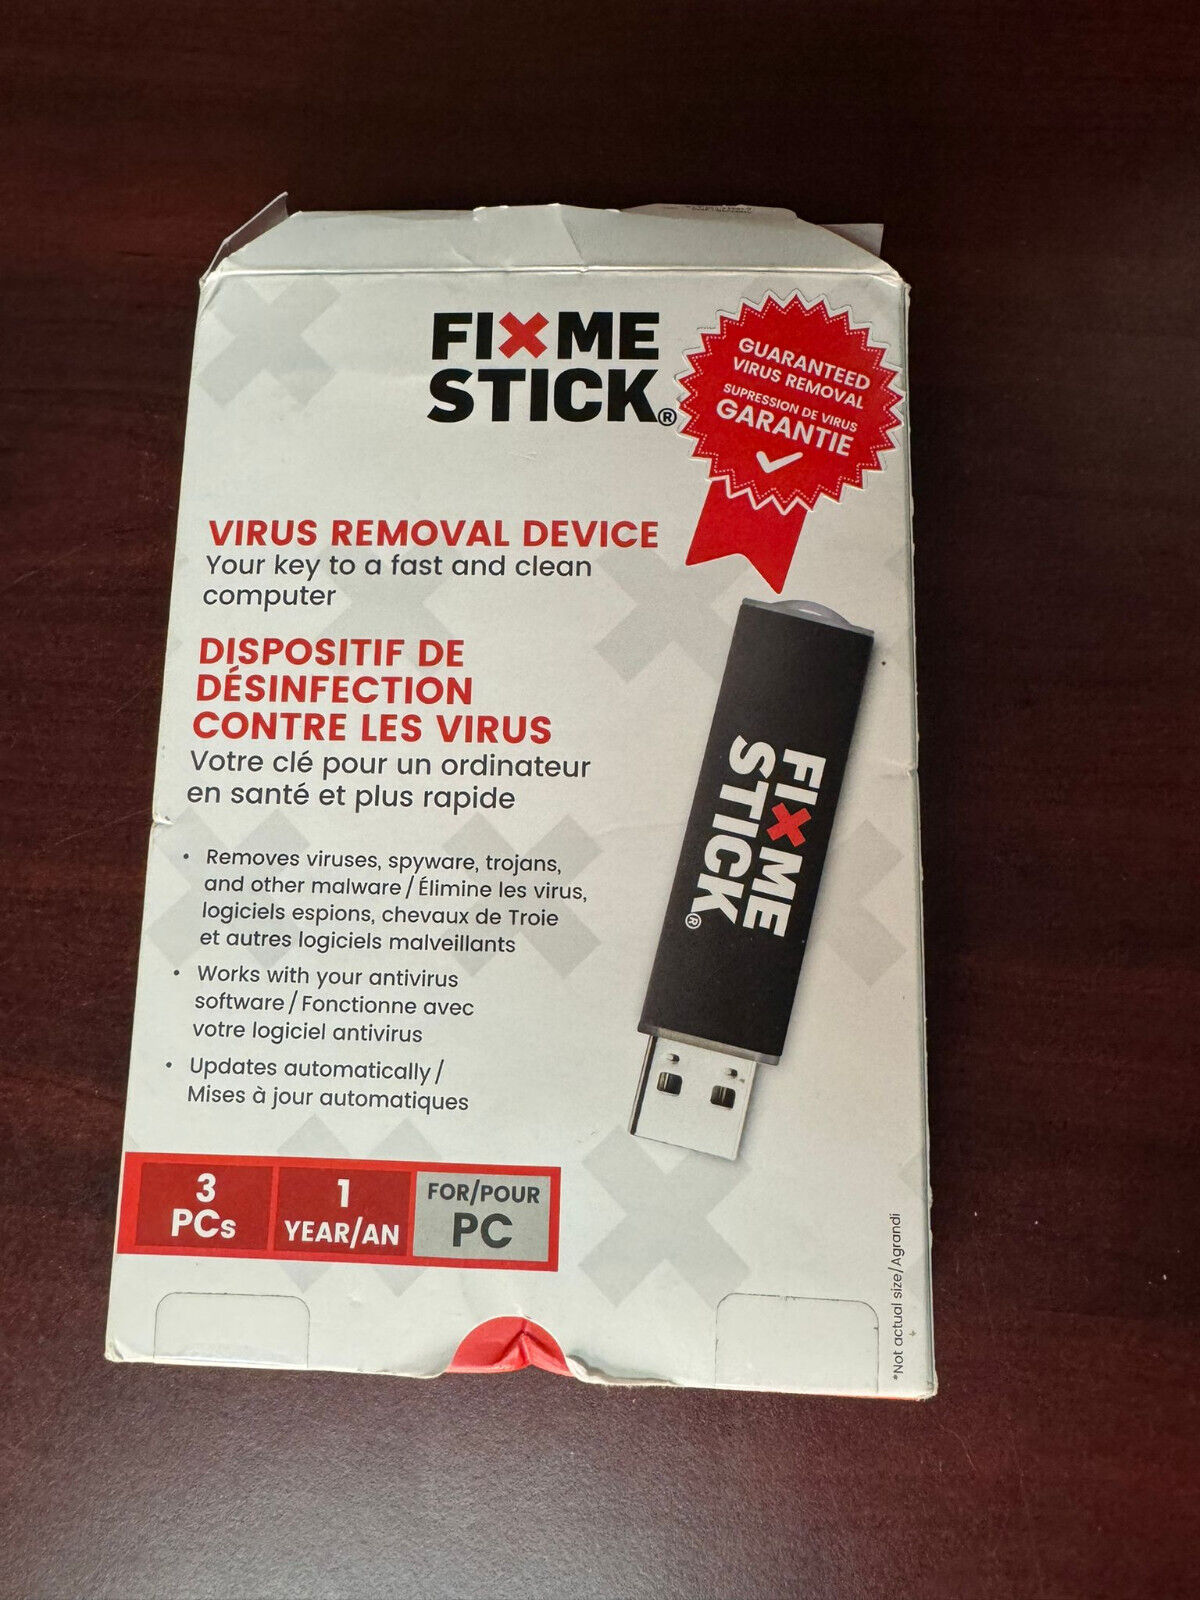 FixMeStick Virus Removal Device - Software for Windows - 3 PCs - Open Box